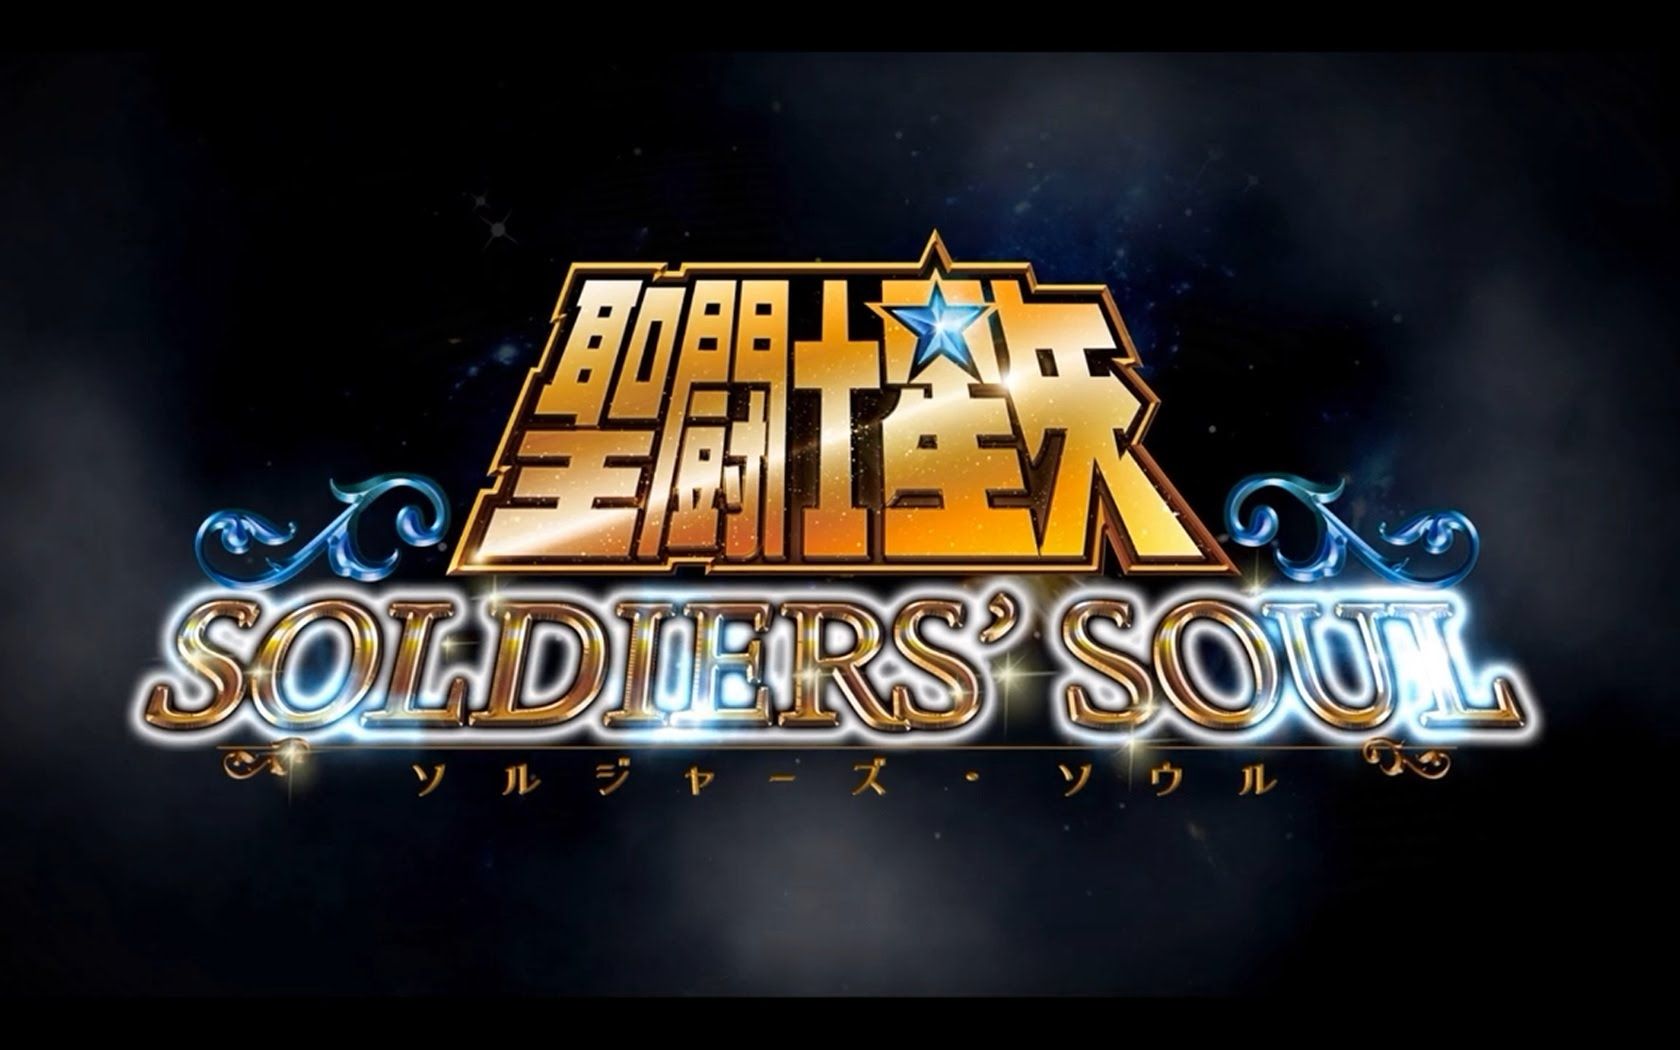 PS4-1080p-60 fps HD] Saint Seiya Soldiers' Soul - Battle of Gold - Aioros 